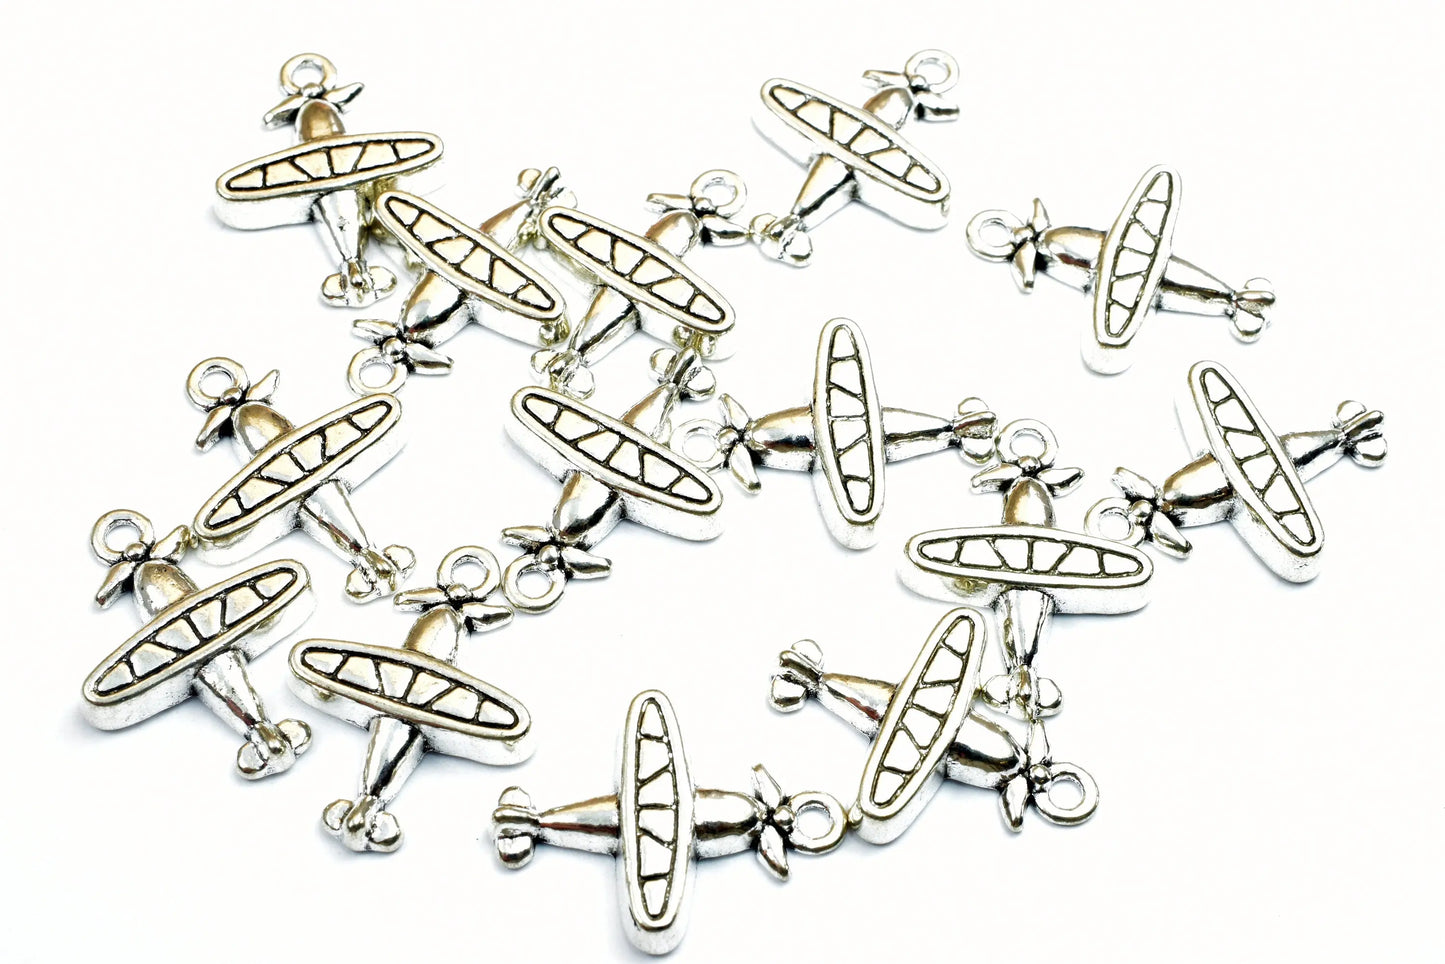 14PCs Airplane Charm Size 21x16mm Antique Tibetan Silver Tone Finding Alloy Charm Pendant Finding For Jewelry Making - BeadsFindingDepot